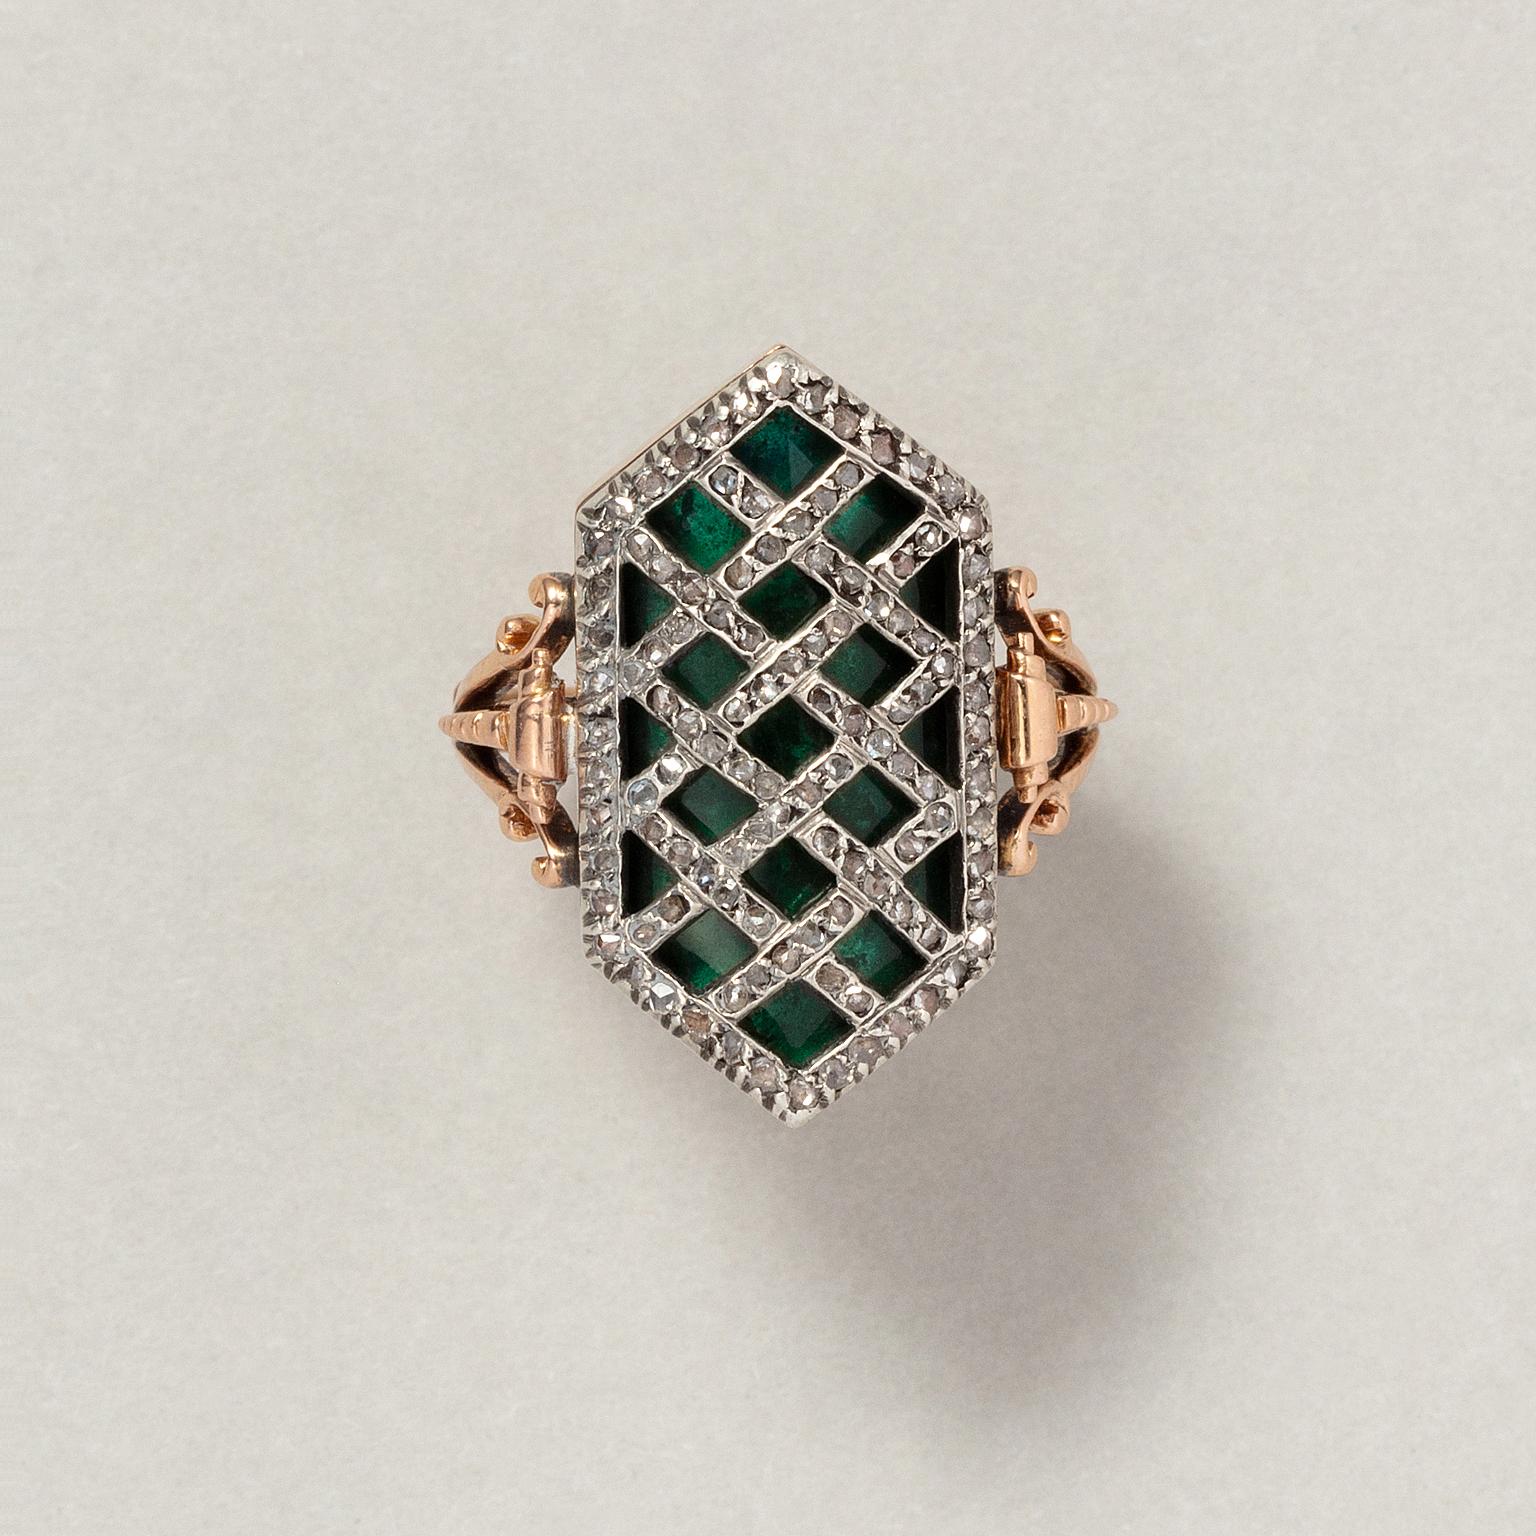 An 18 carat rose gold and ring with a hexagonal concave element with dark green, transluscent glass over which a silver diagonal grid set with rose cut diamonds, the shank is florally engraved and with a three forked hoop with scrolls, the shank has